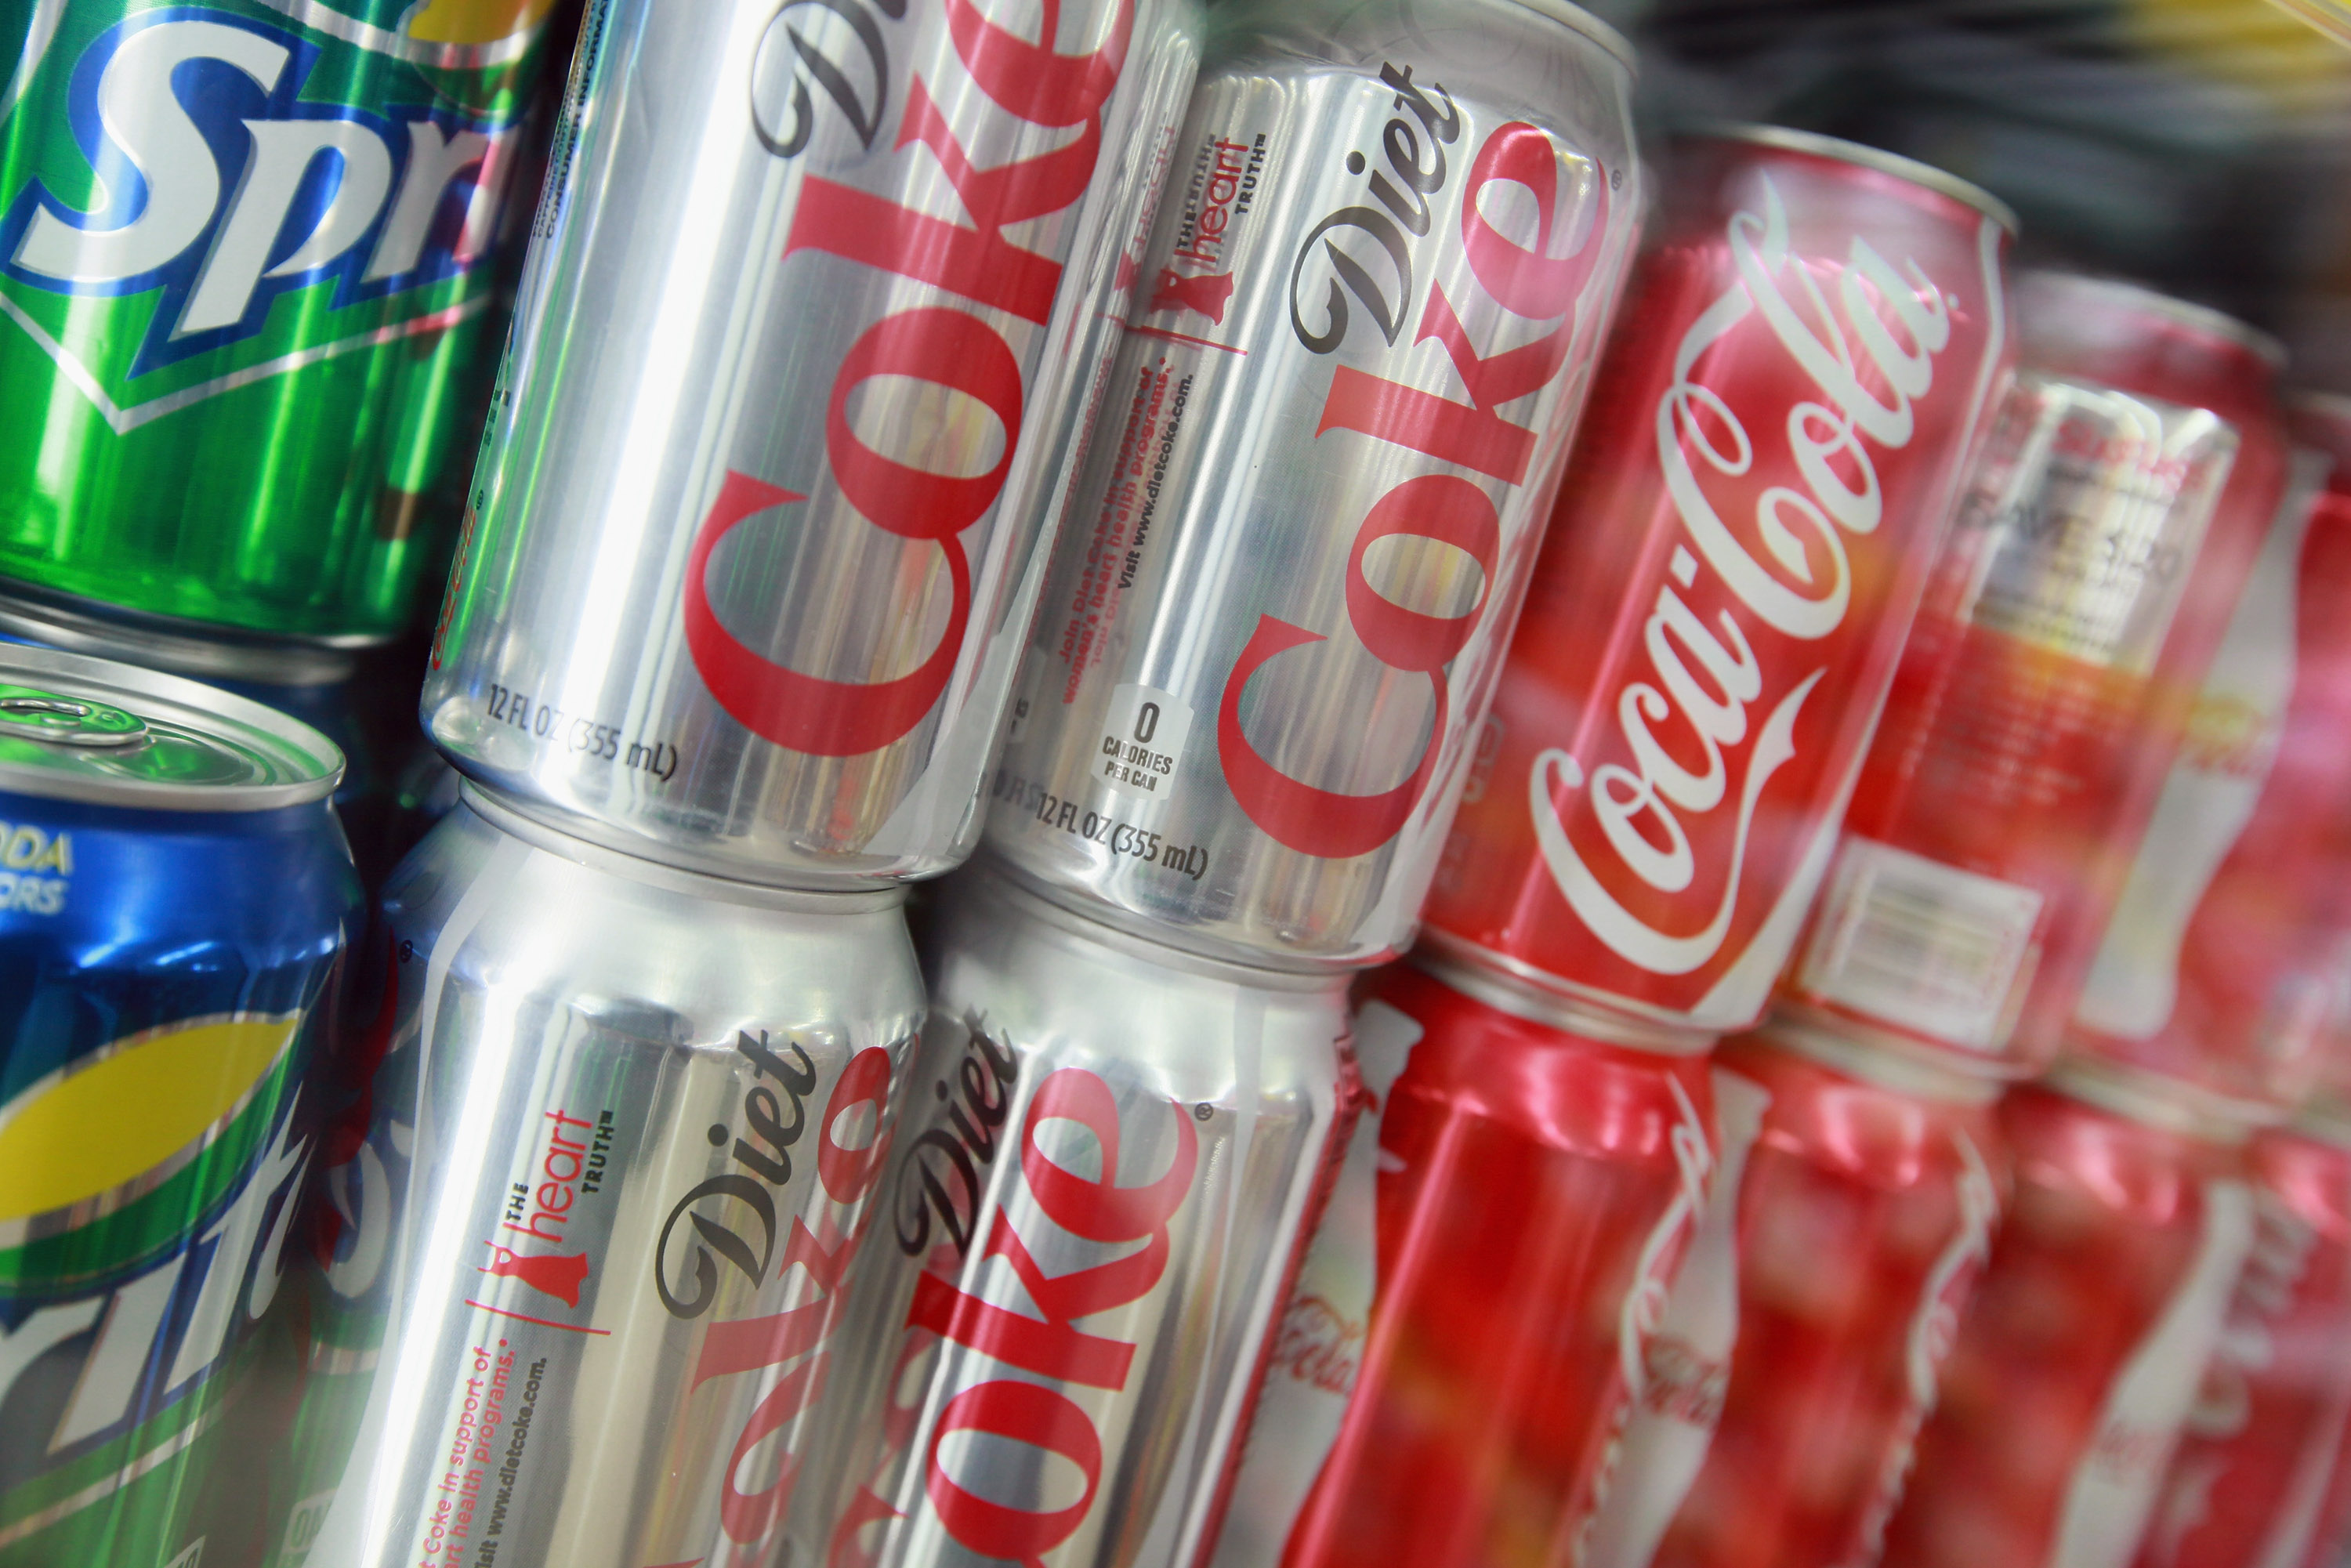 Coca-Cola issues soda recall over foreign material - CBS News